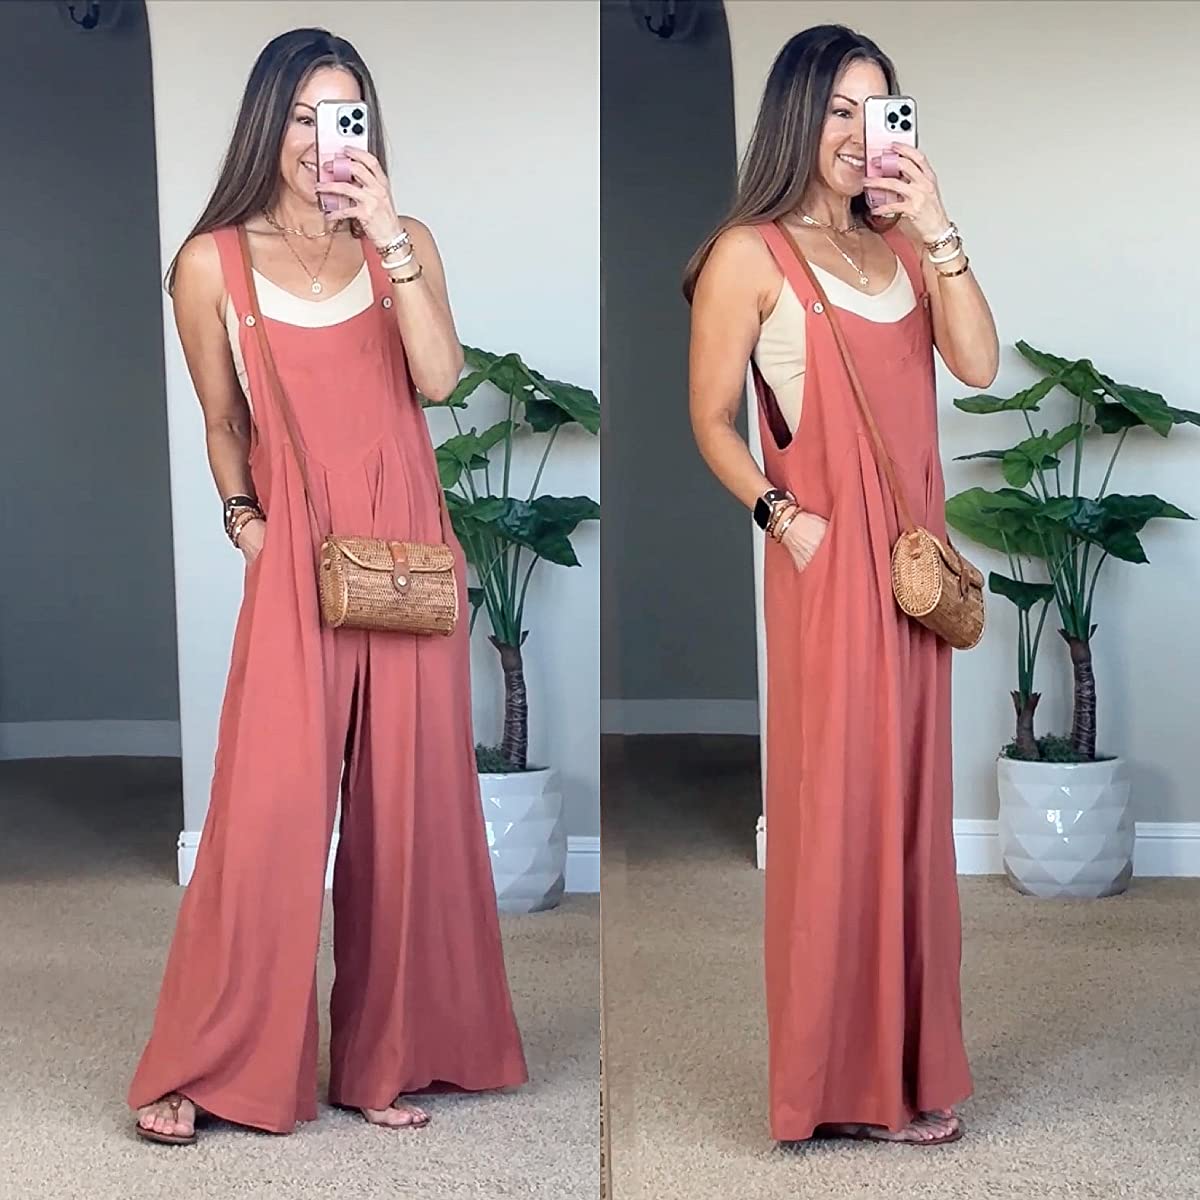 amazon top 10, best selling fashion, deep side jumpsuit, wide leg jumpsuit, spring style, casual spring look, amazon find 